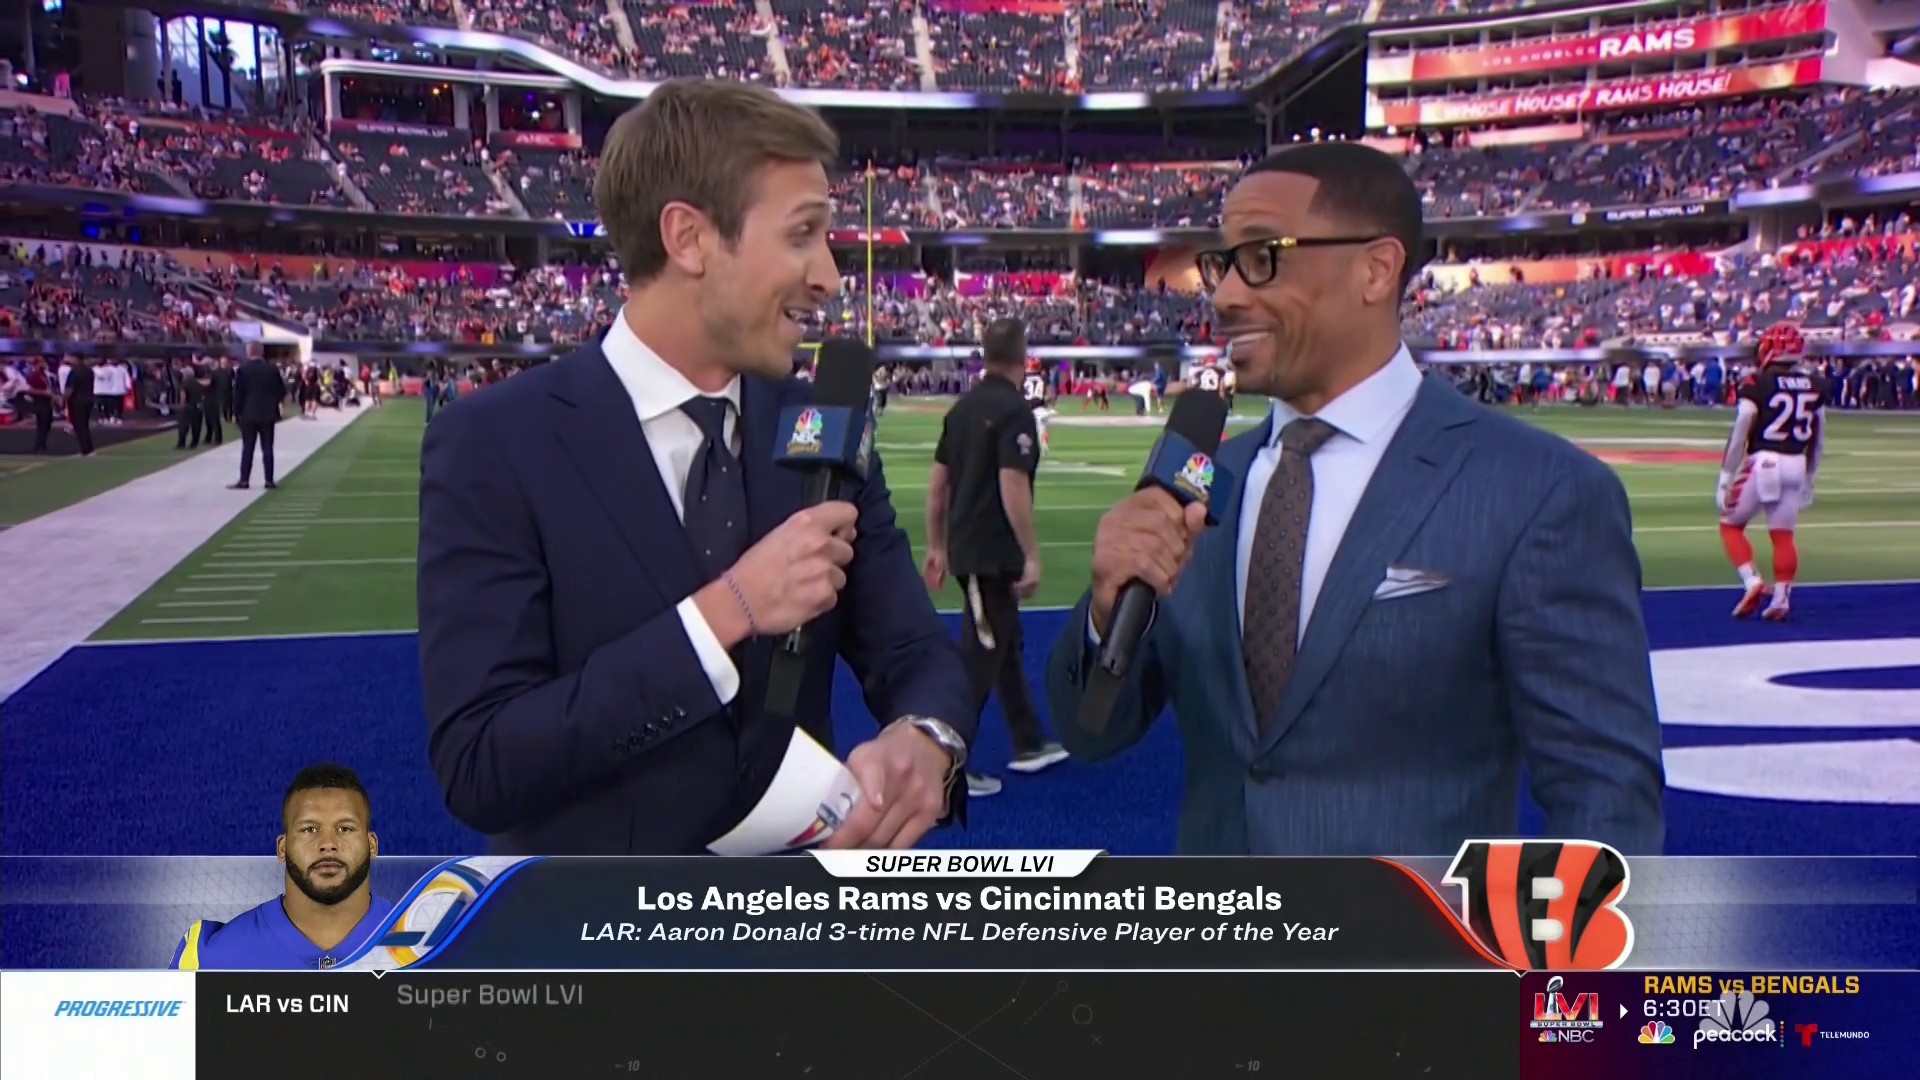 Ari Meirov on X: 'Rodney Harrison just said on NBC's pregame show that  Aaron Donald told him there's a strong possibility he could retire if the # Rams win the Super Bowl. Video